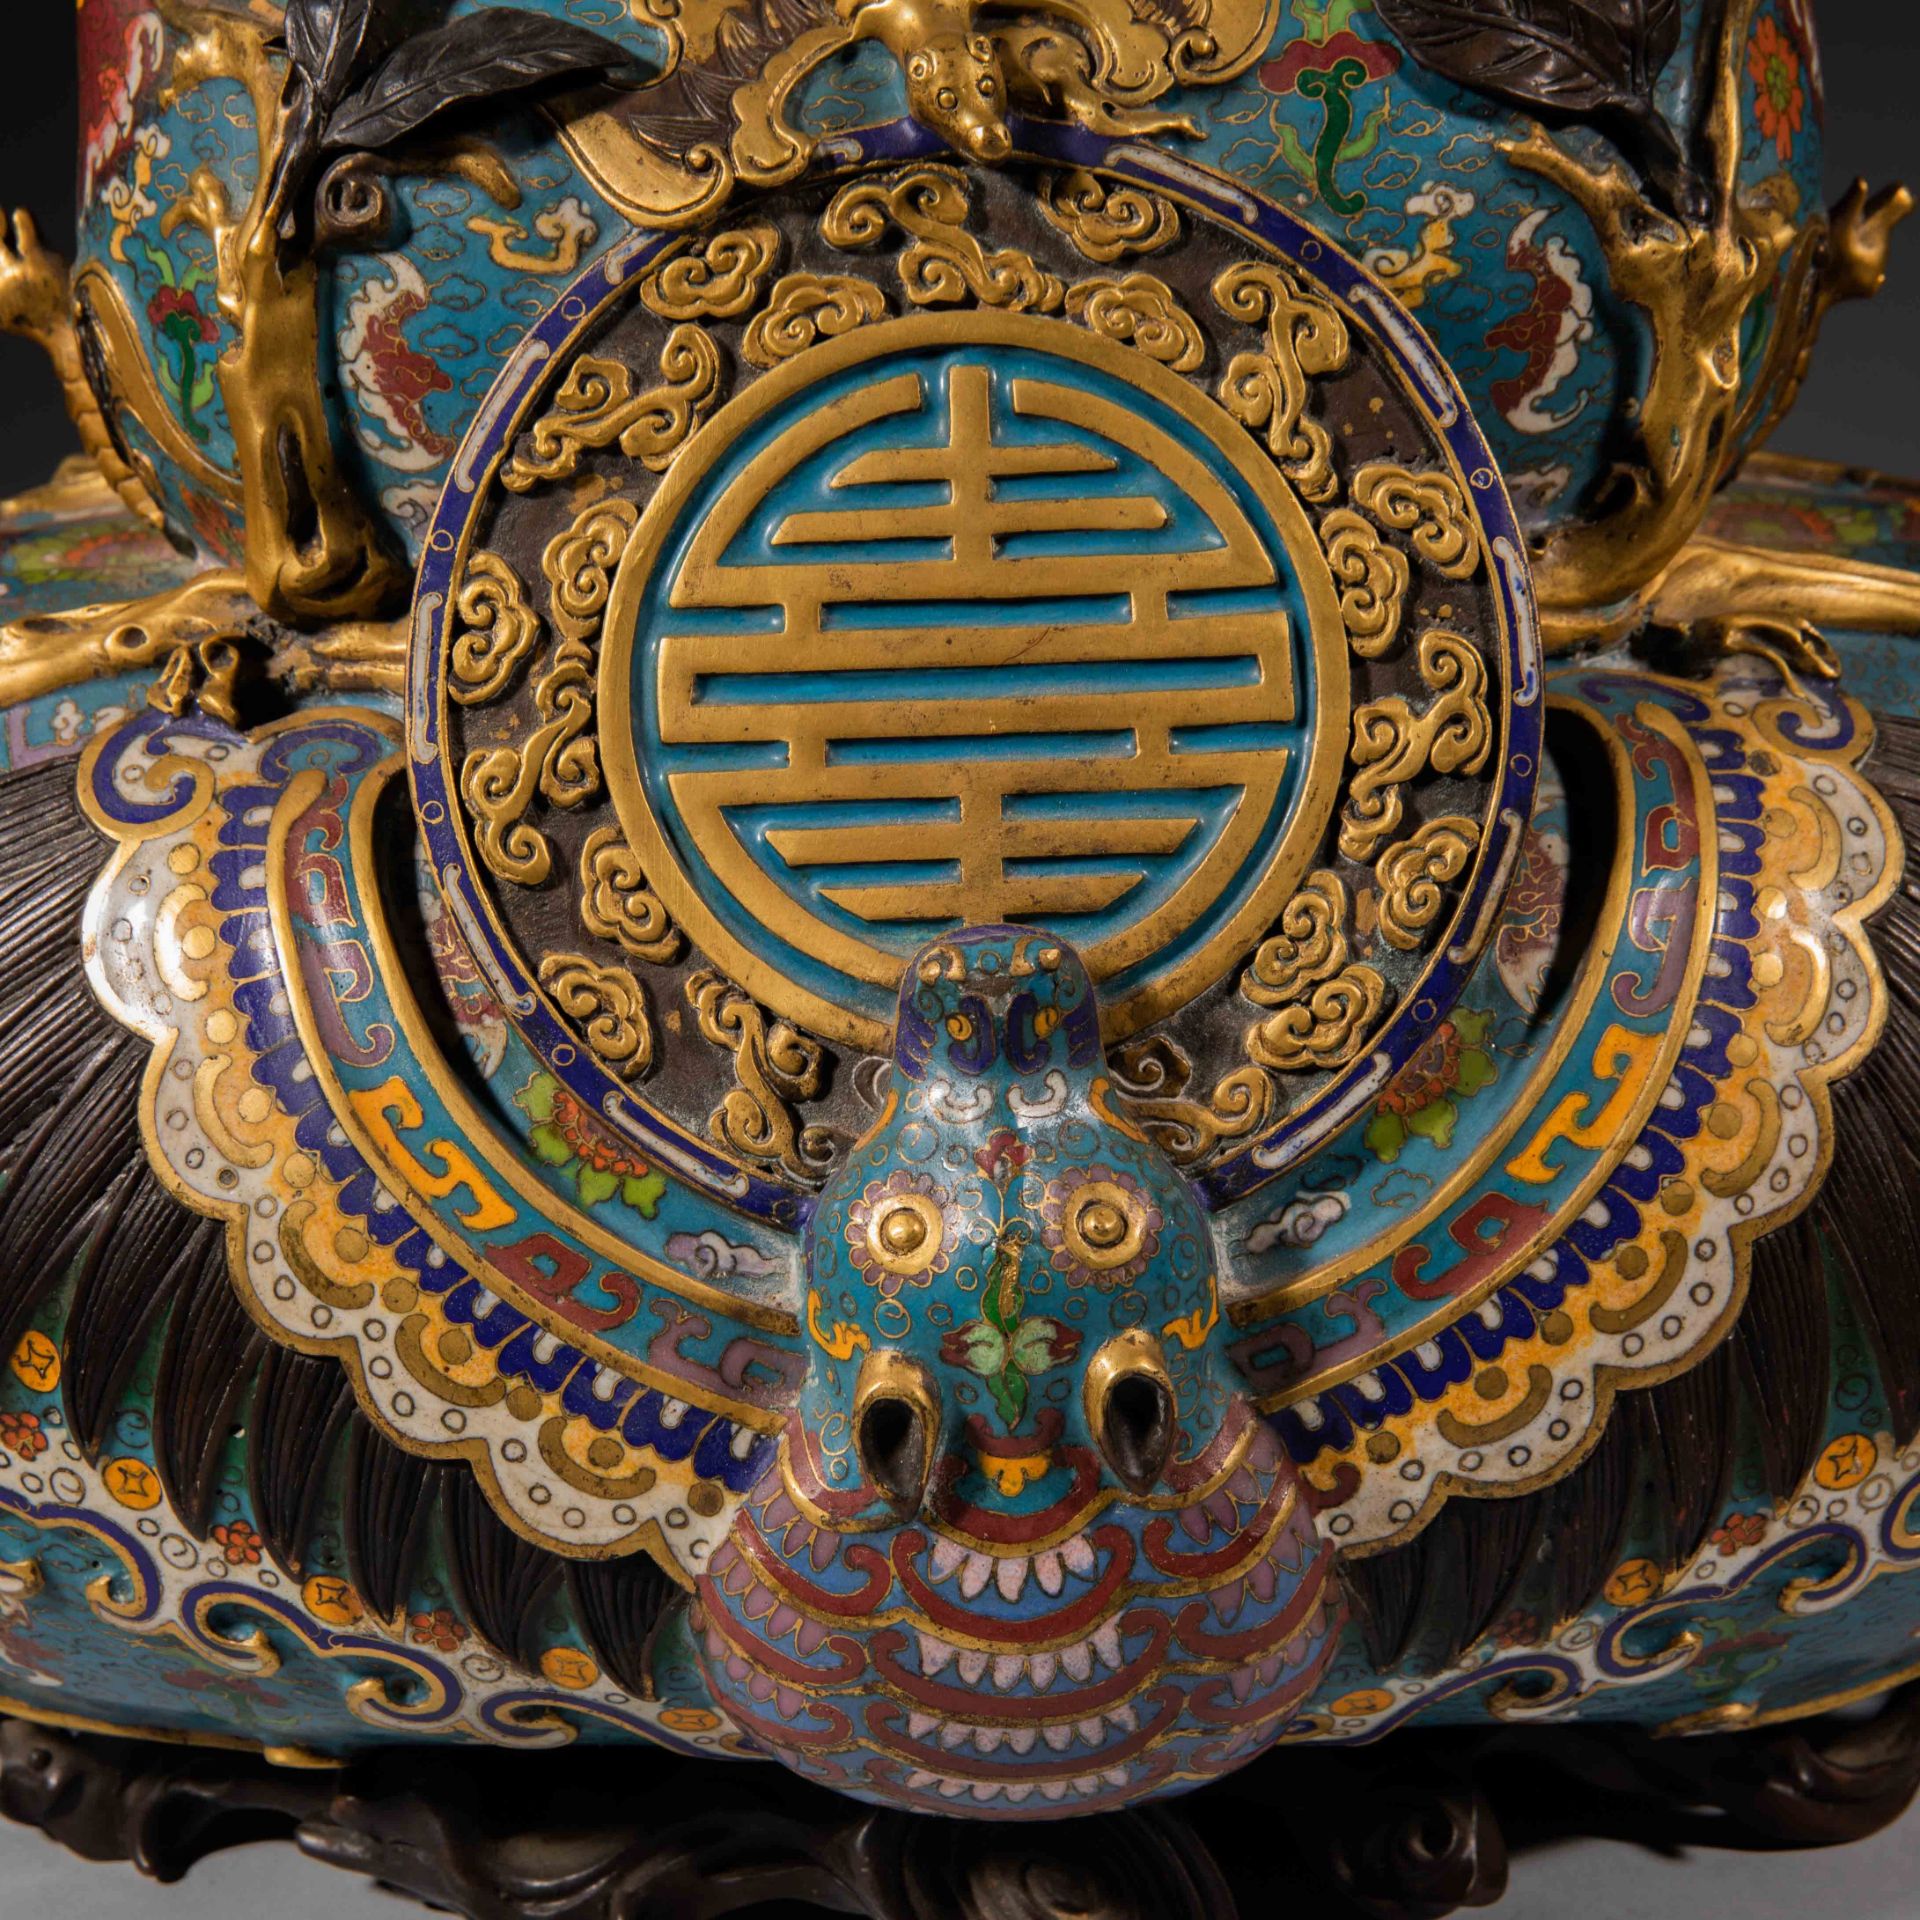 A Qianlong-marked Cloisonne Vase, Qing Dynasty, China - Image 3 of 12